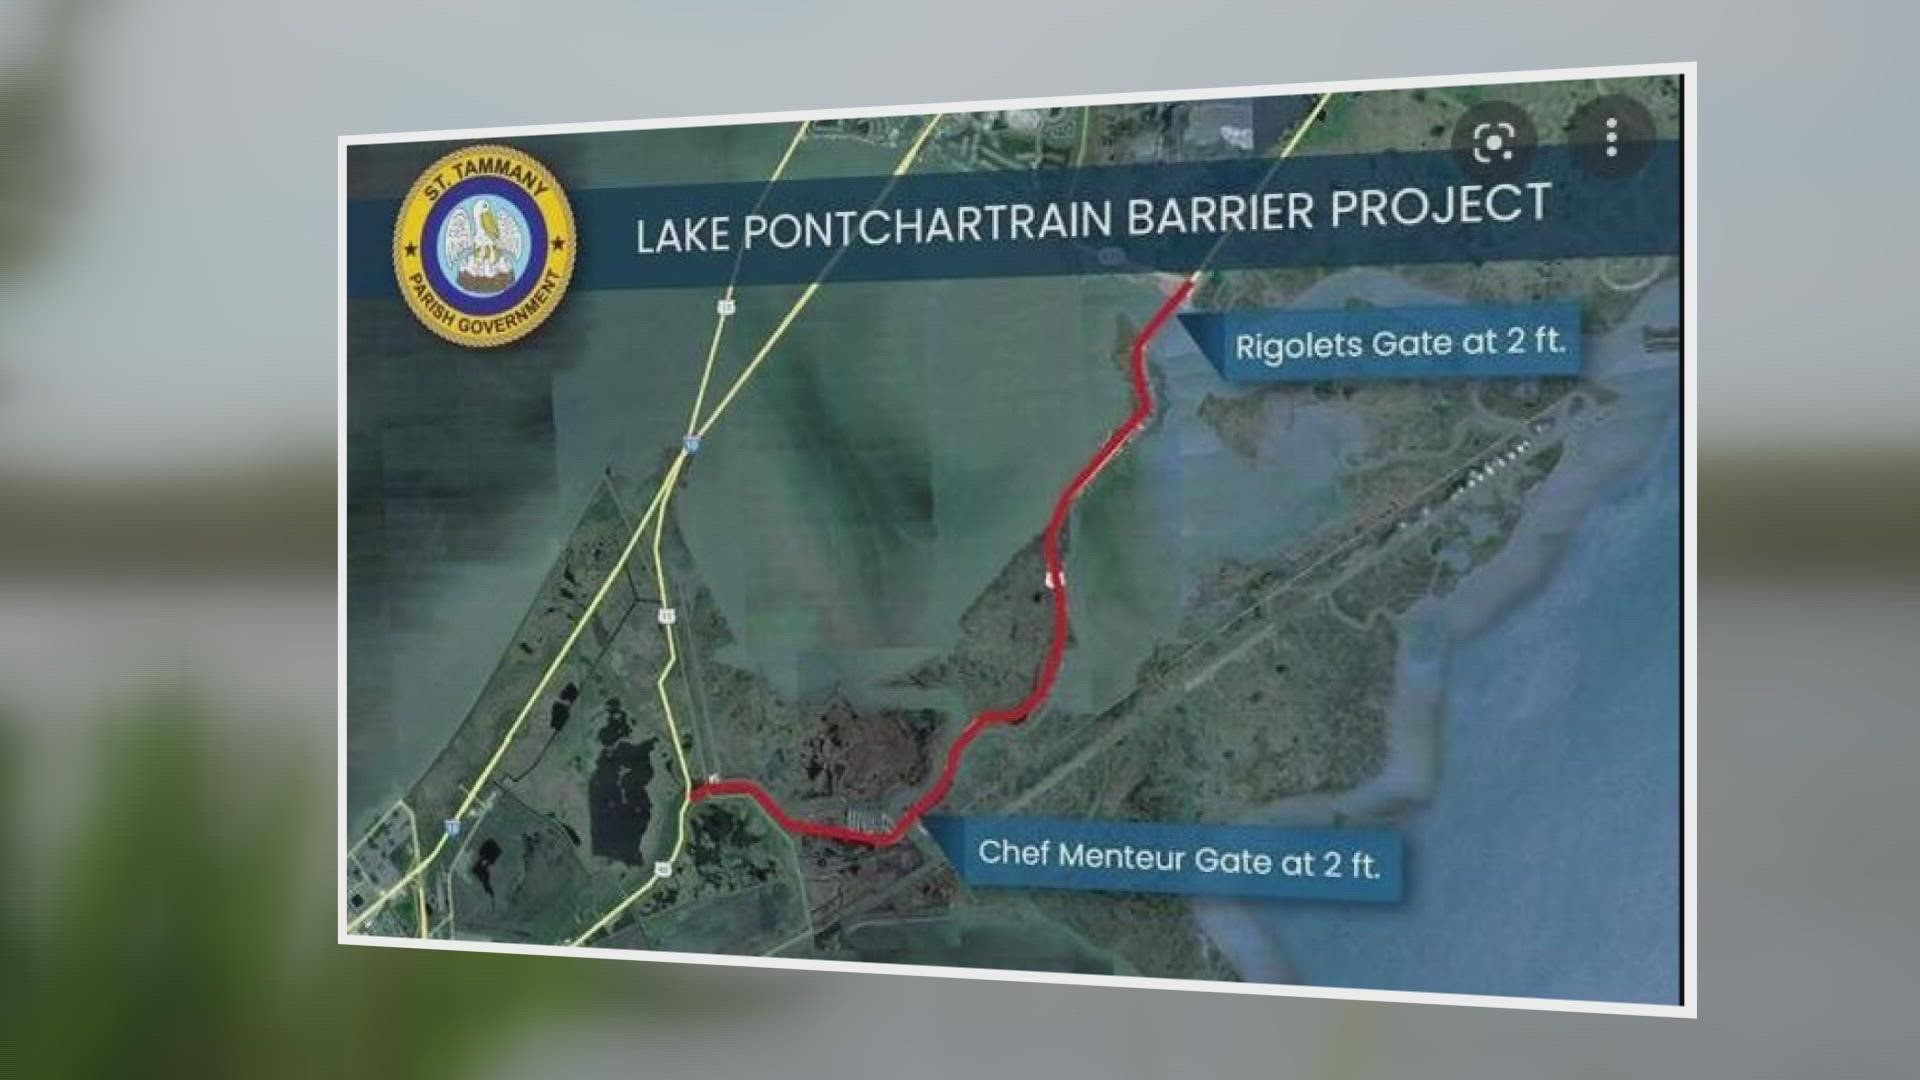 The new levee protection plan is now called the Lake Pontchartrain Barrier project. The roots of this plan go all the way back to Hurricane Betsy.